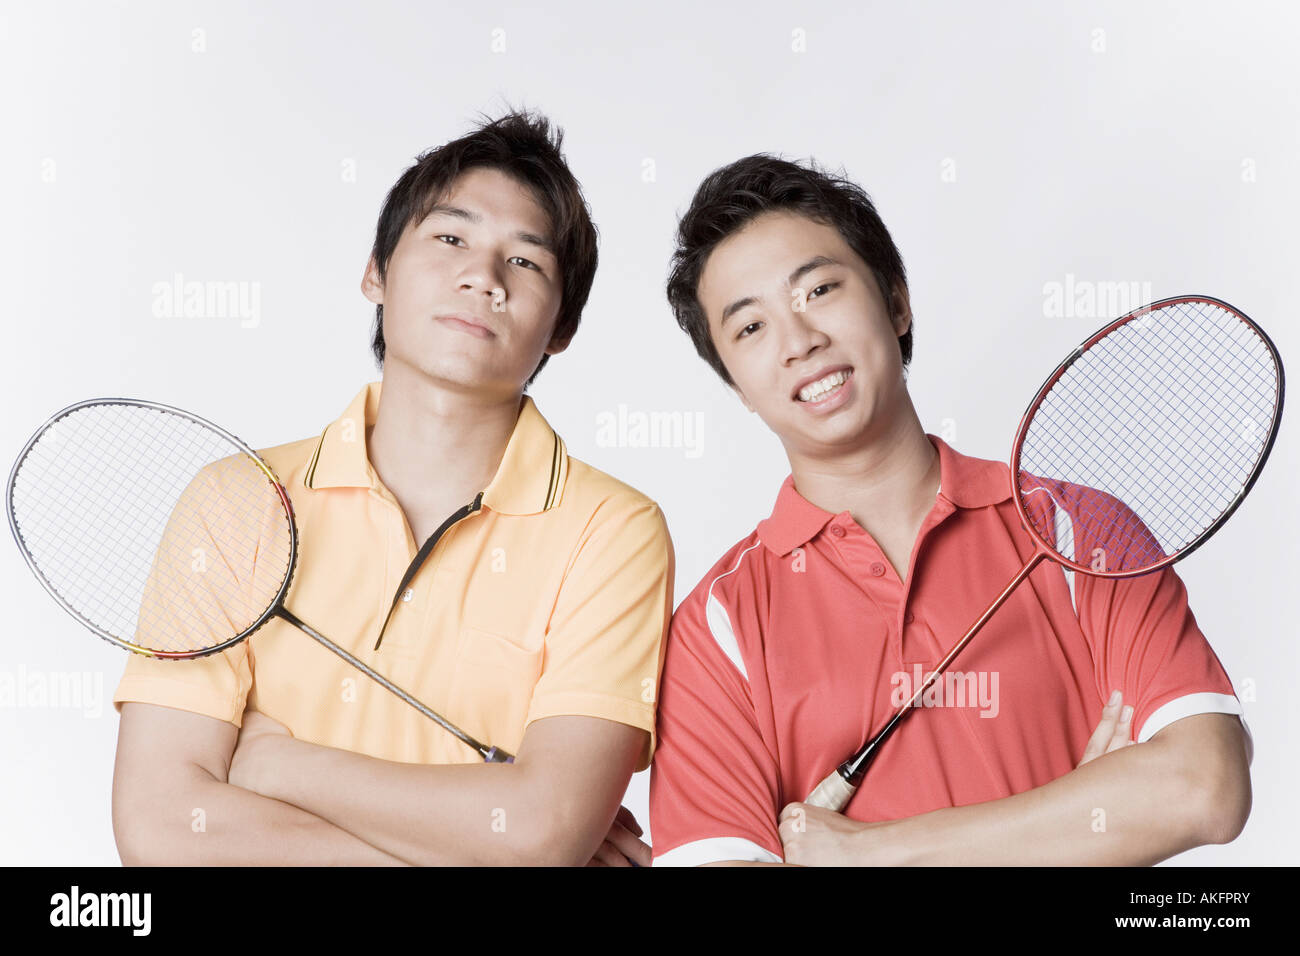 Portrait of two young men holding badminton rackets and smiling Stock Photo